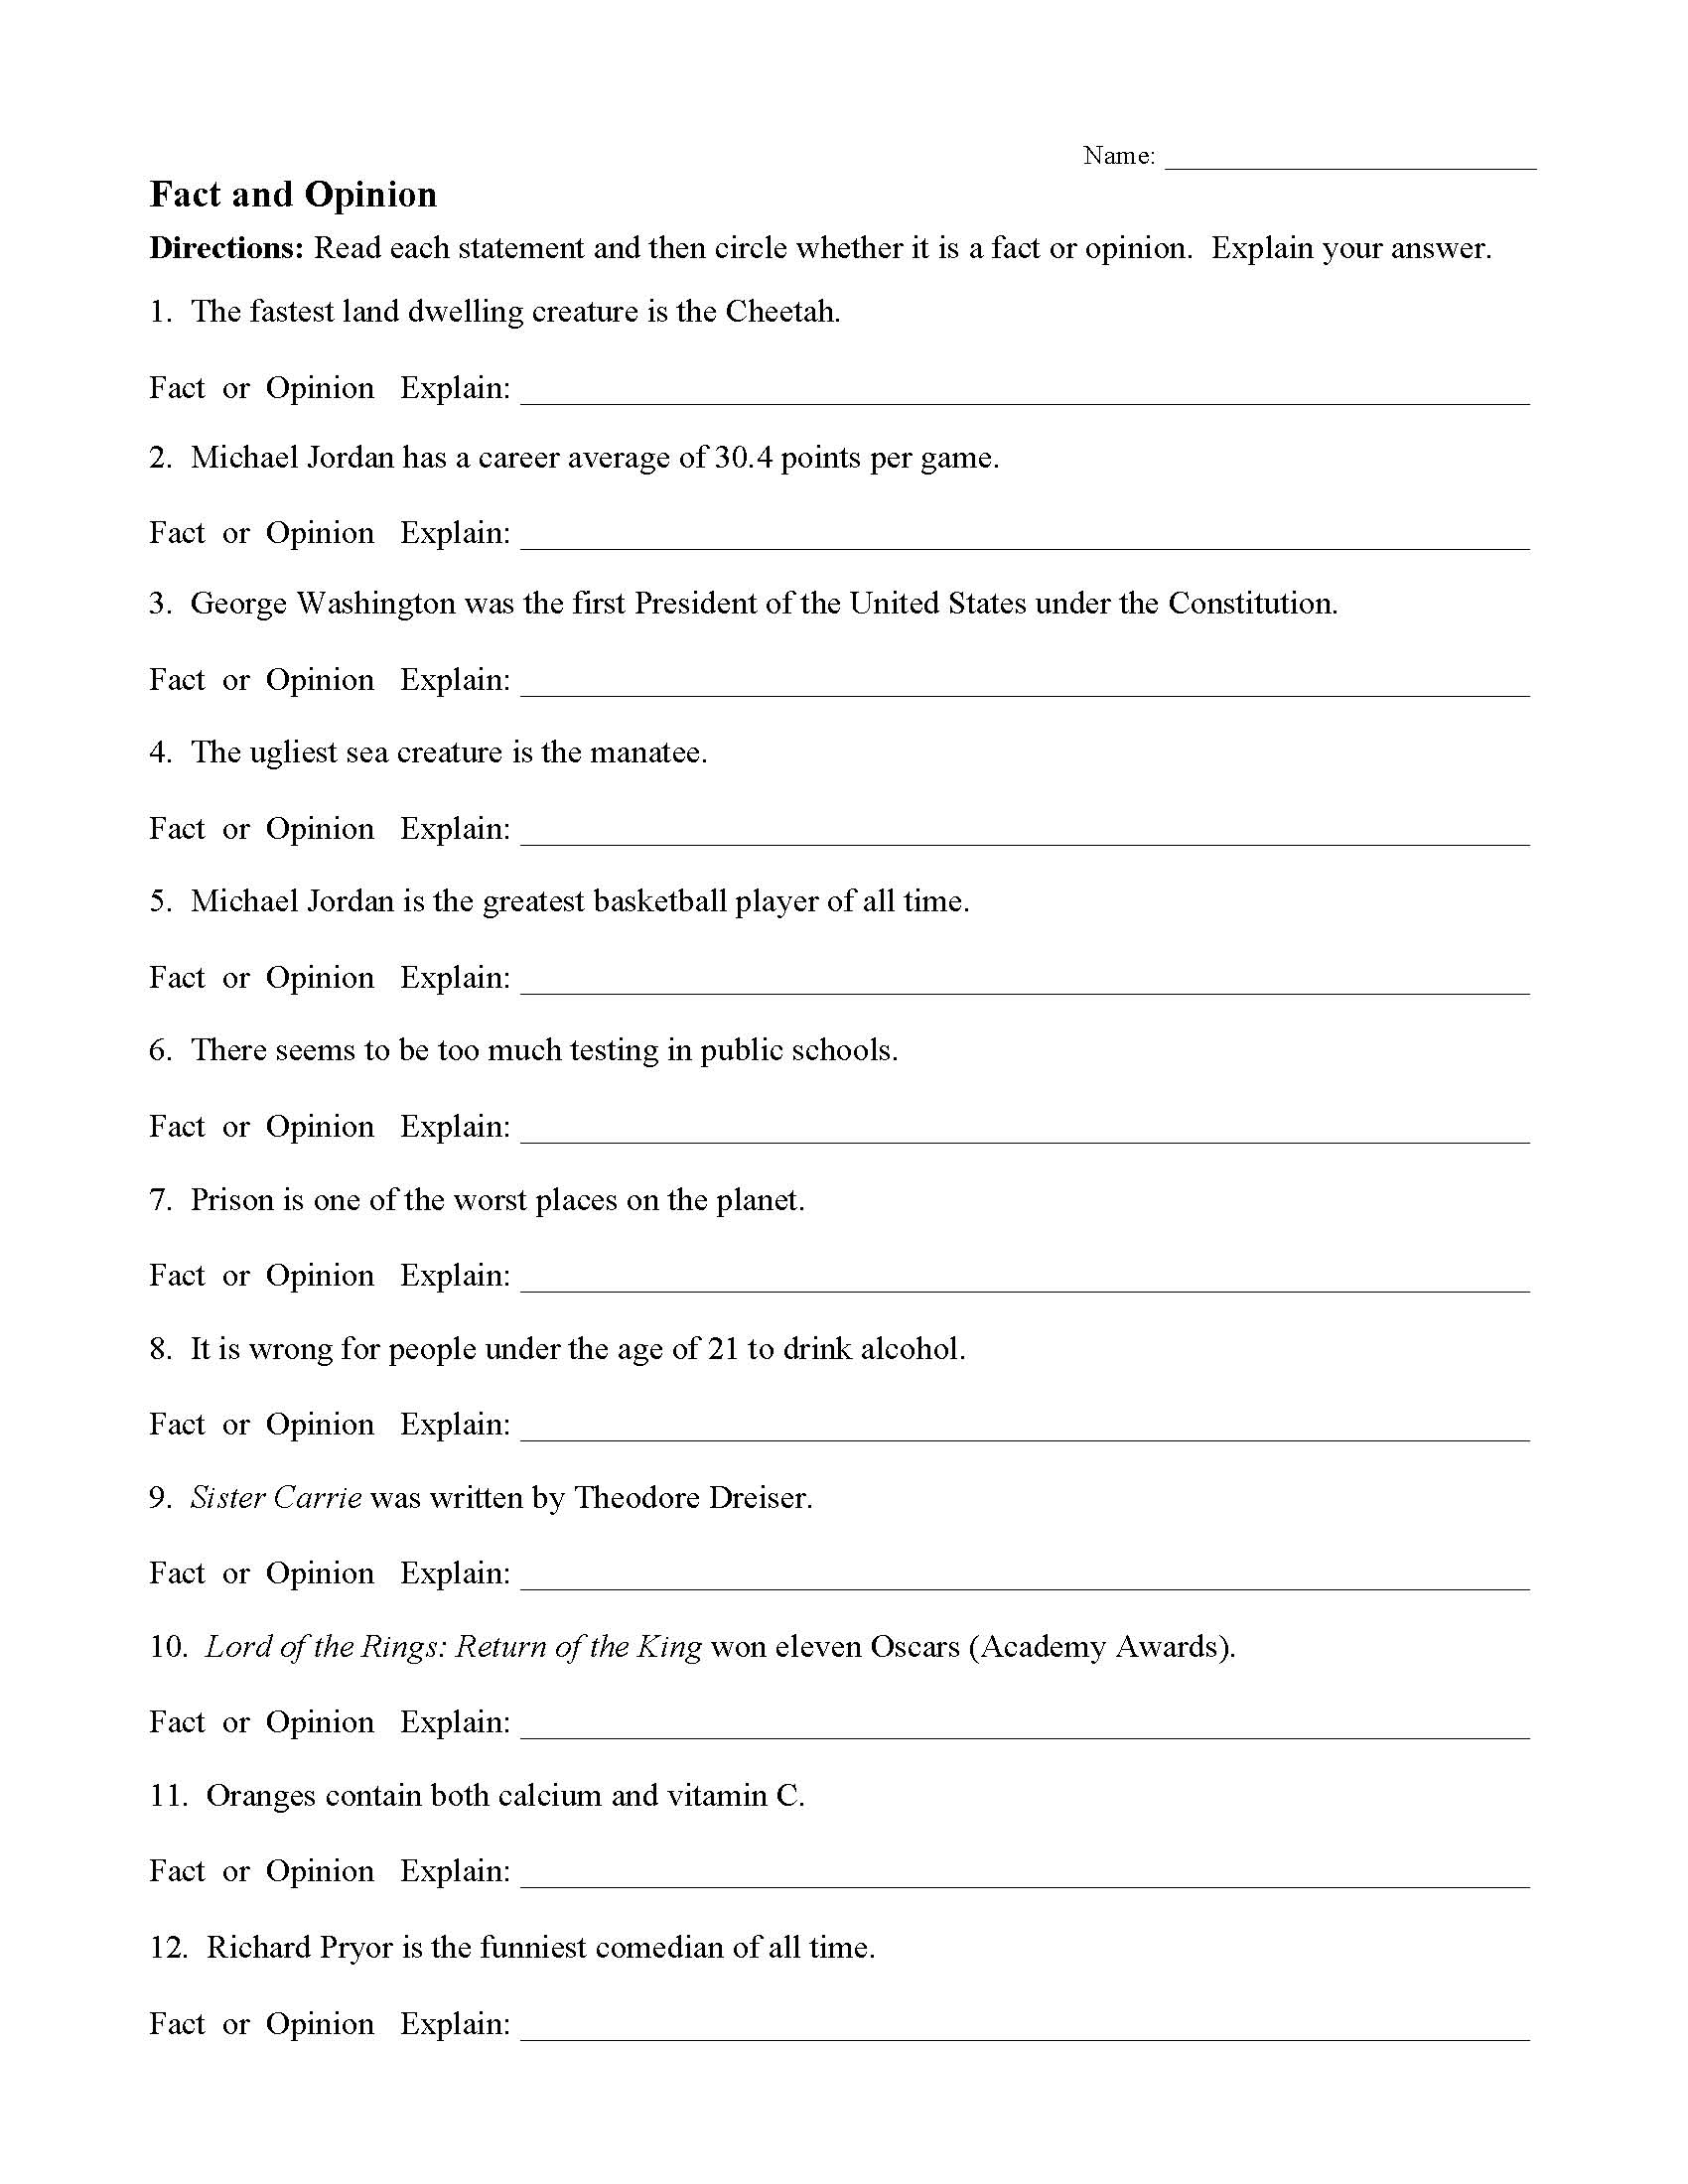 fact-or-opinion-worksheet-by-teach-simple